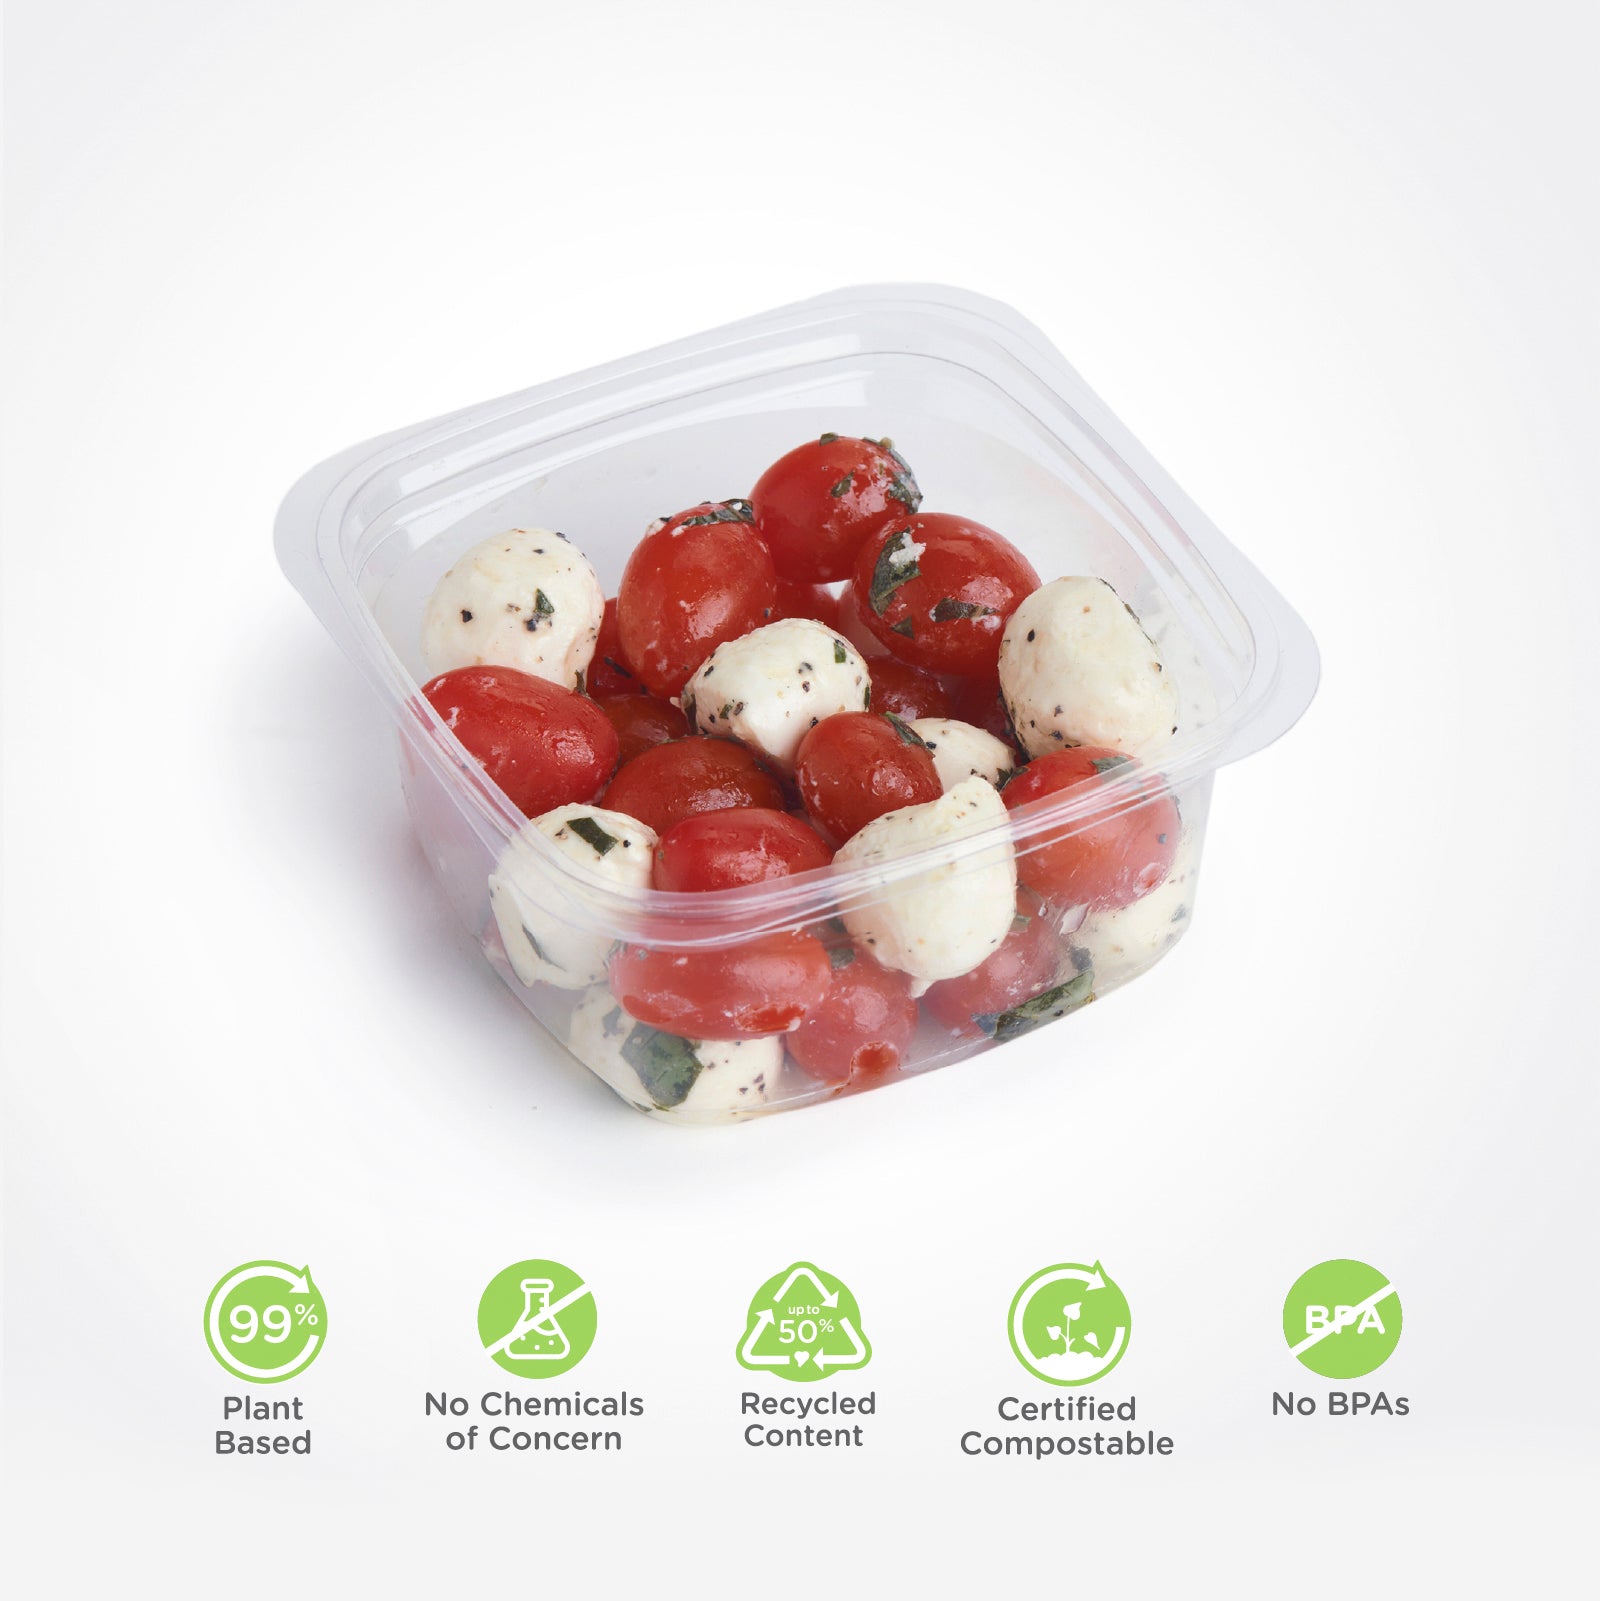 Plastic Deli Food Storage Containers with Airtight Lids [12 oz